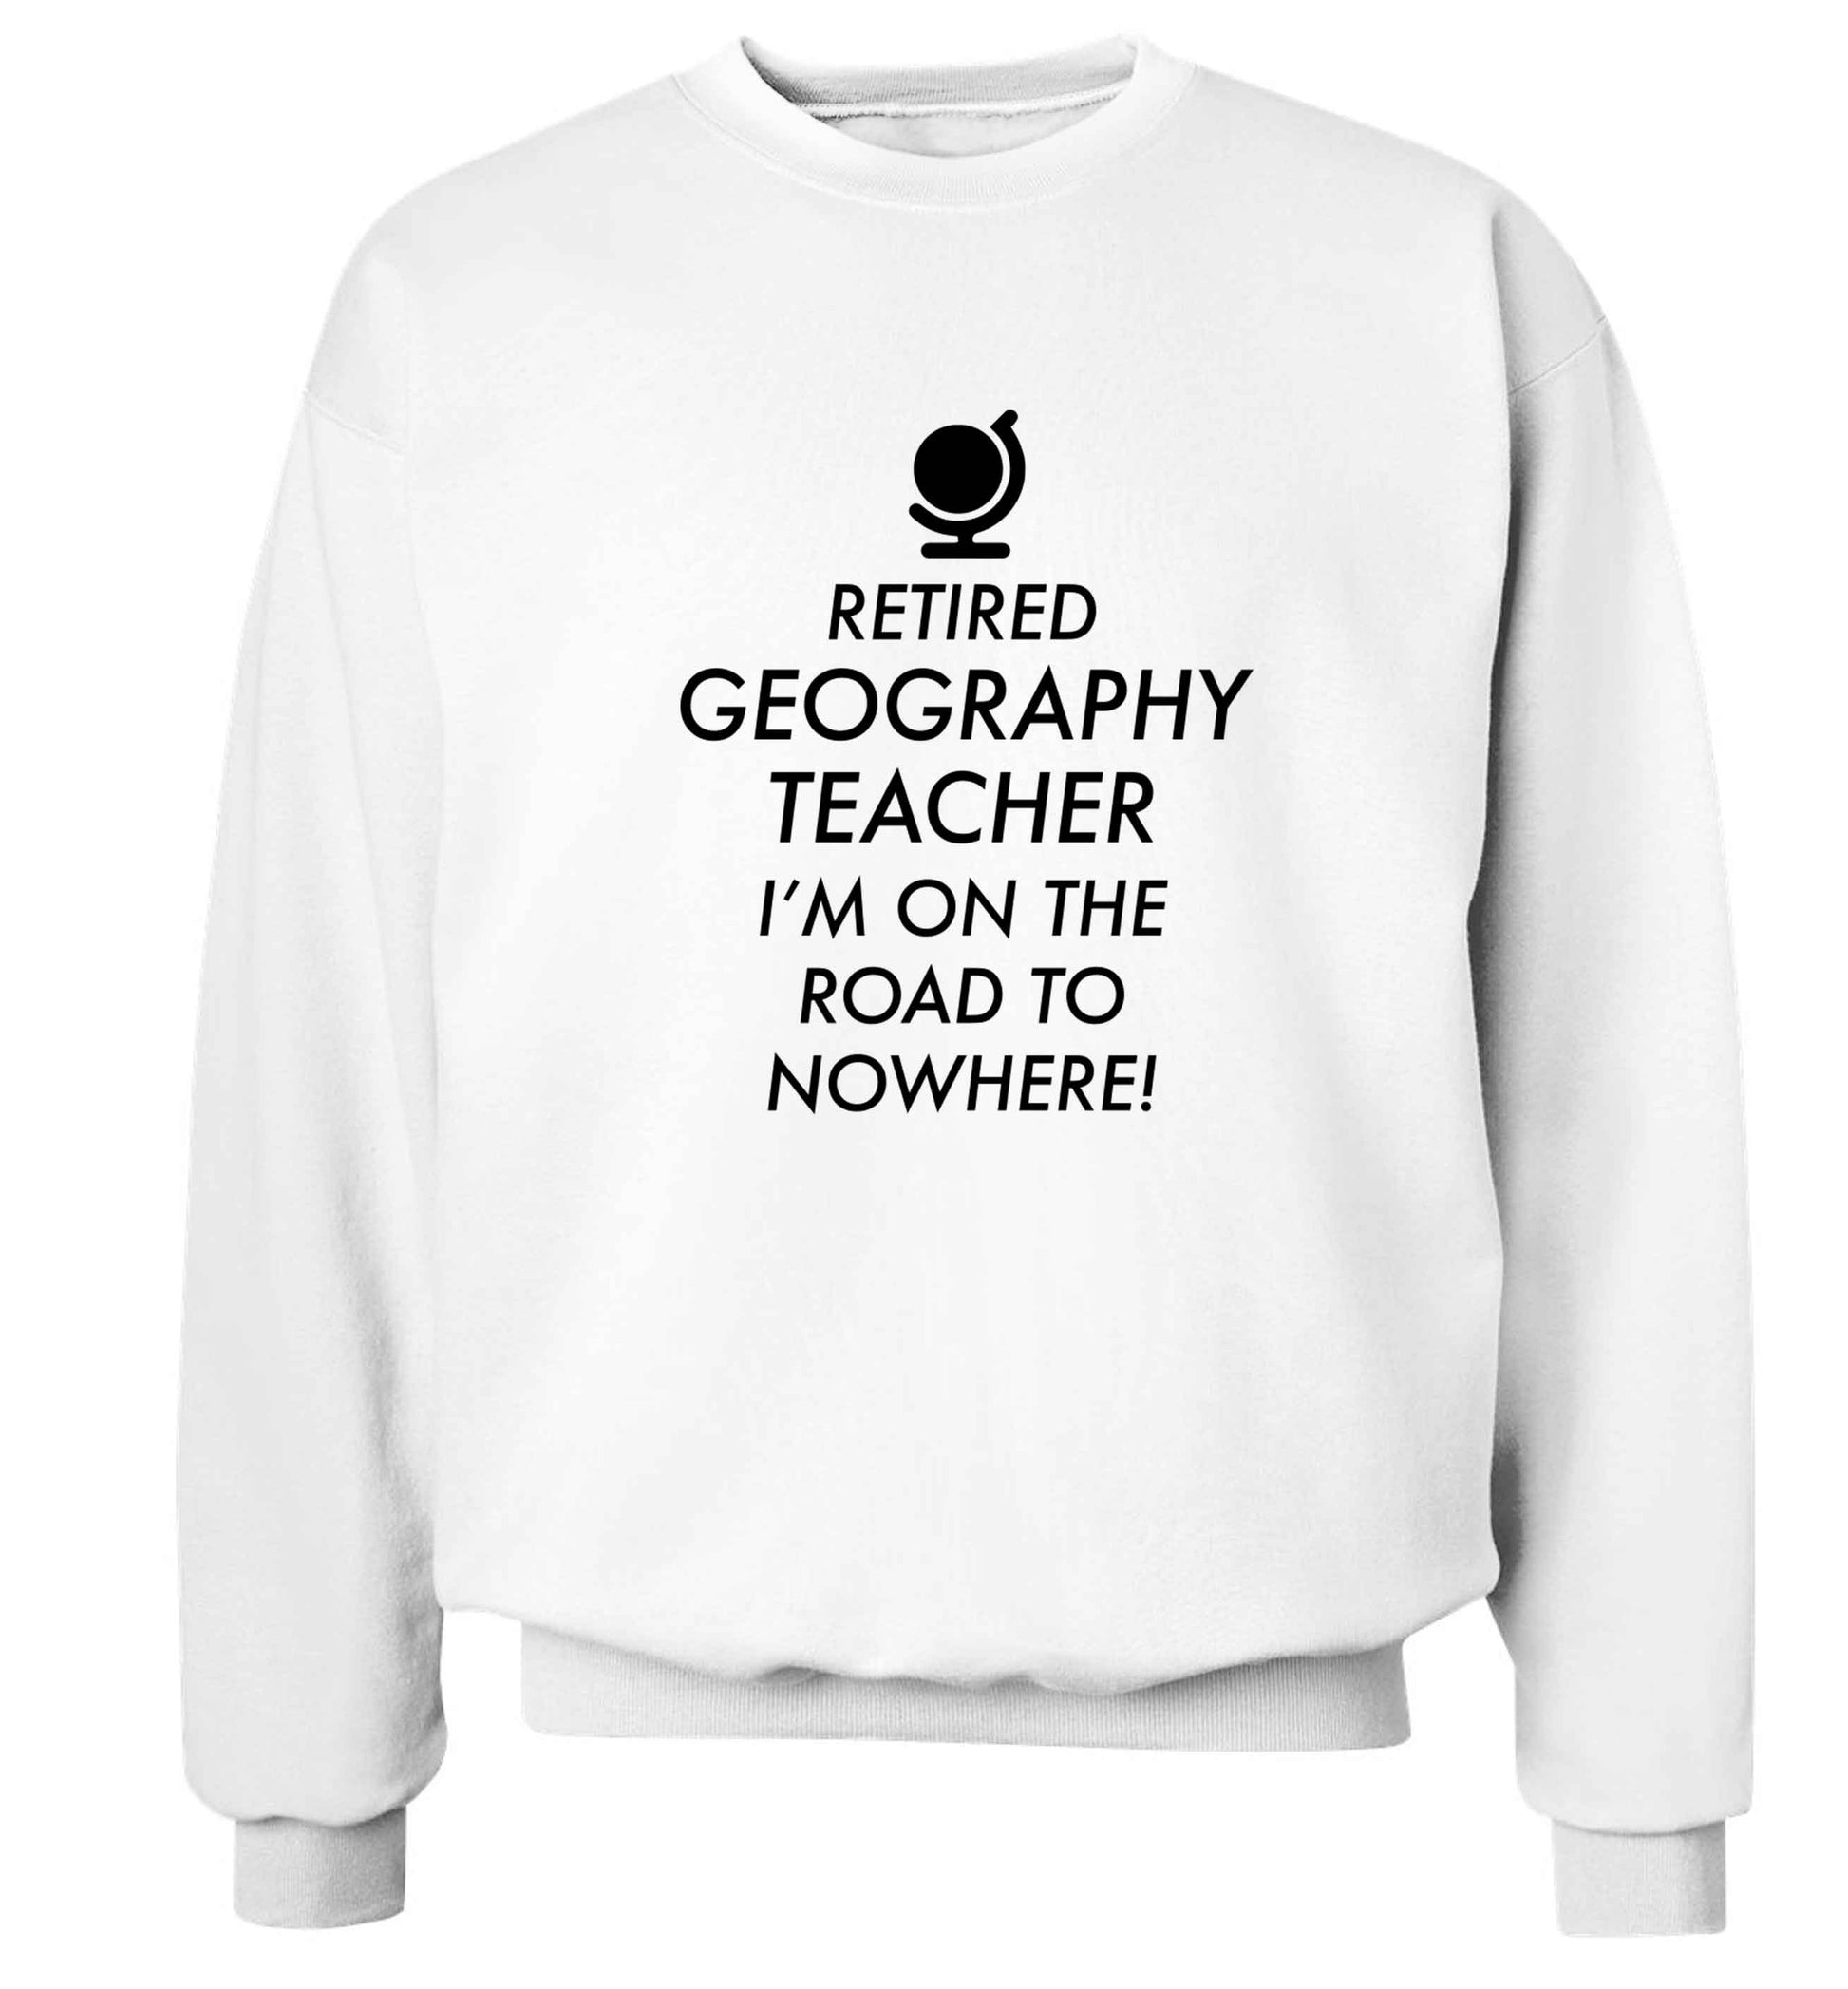 Retired geography teacher I'm on the road to nowhere Adult's unisex white Sweater 2XL